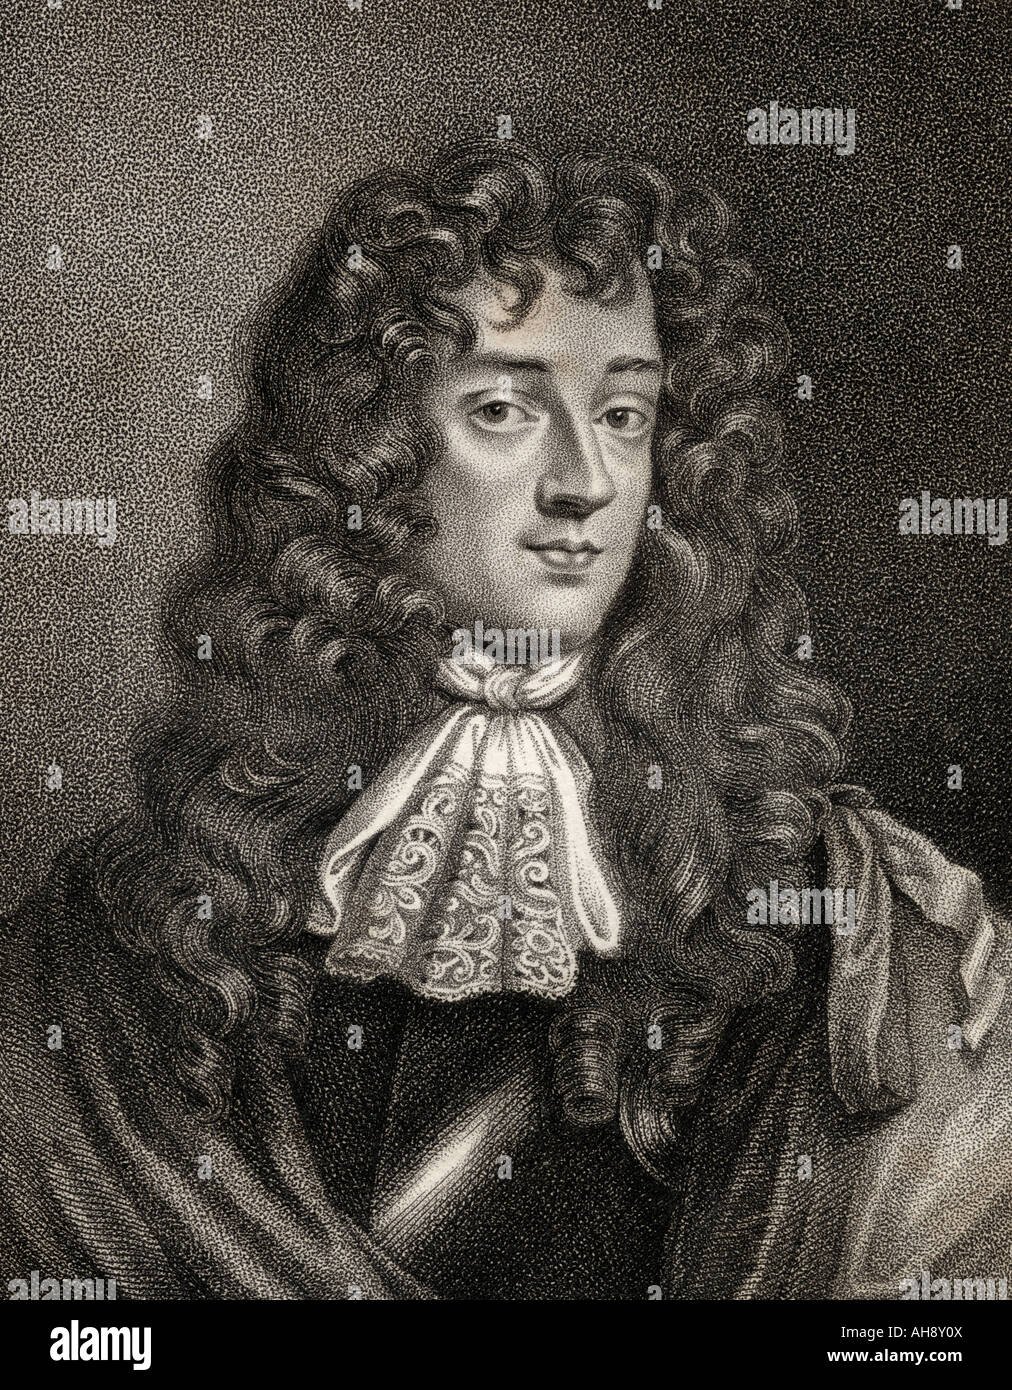 John Wilmot, 2nd Earl of Rochester, 1647 - 1680. English libertine and writer of satirical and bawdy poetry. Stock Photo